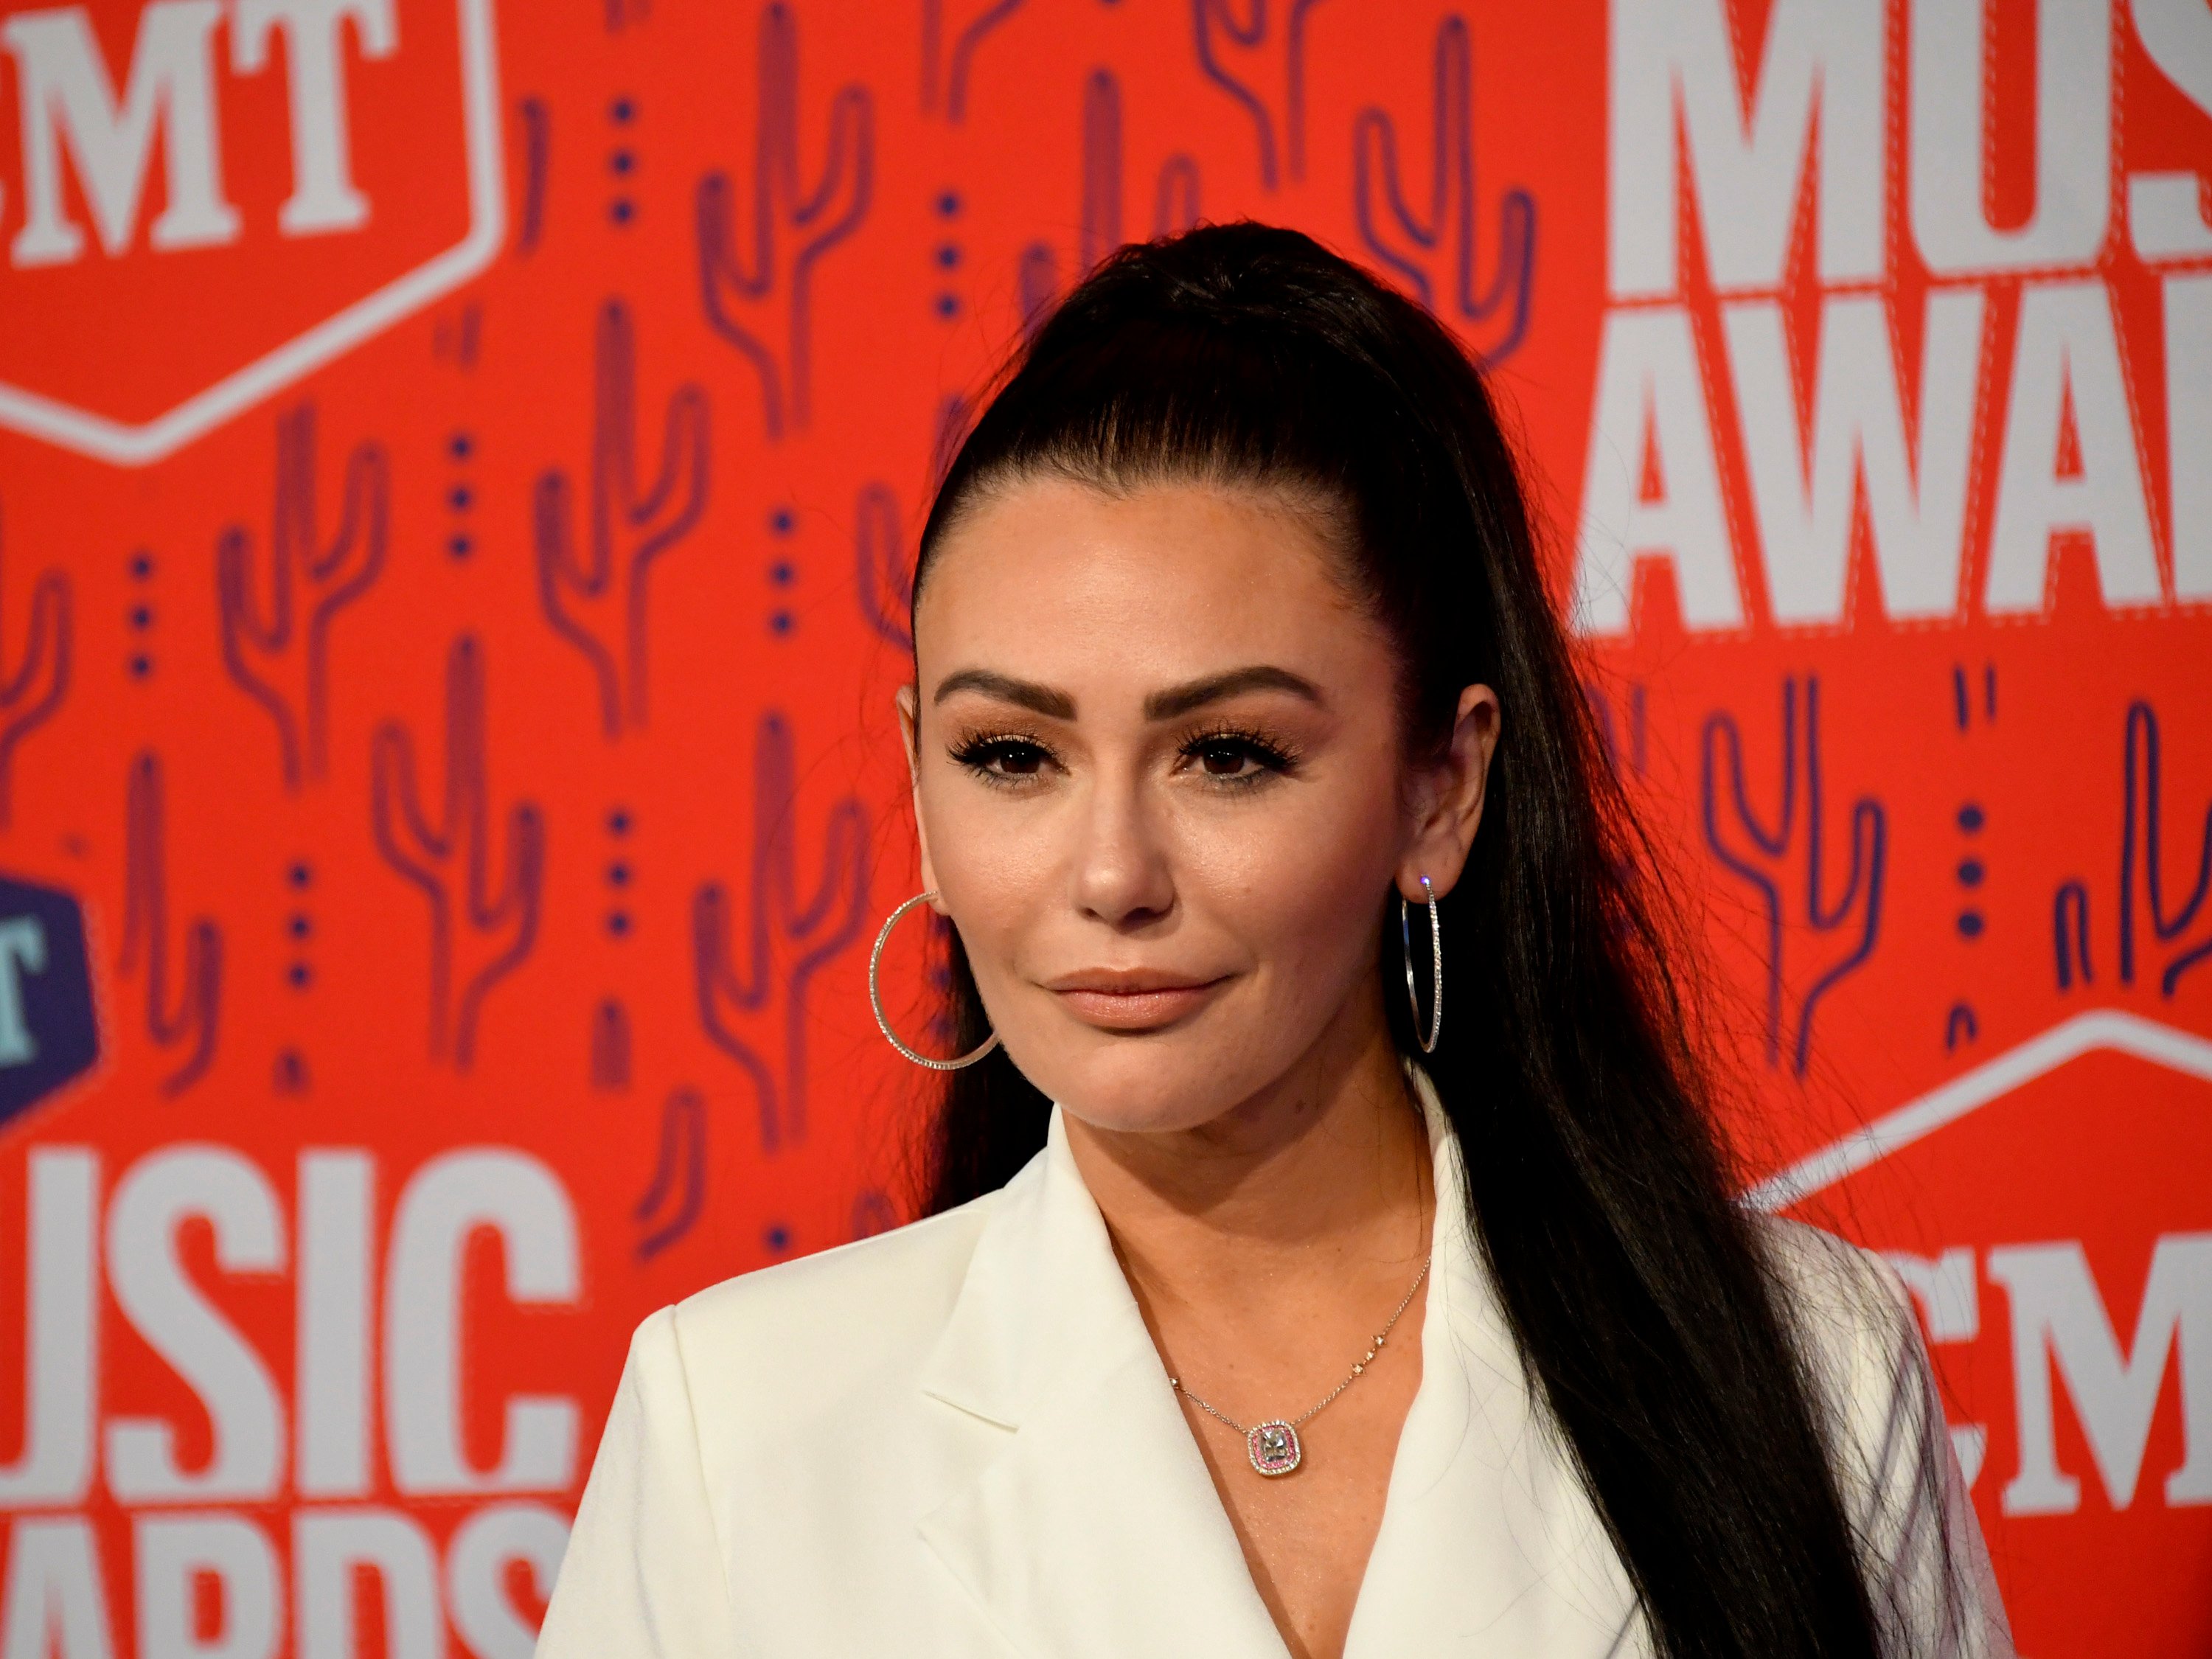 'Jersey Shore: Family Vacation' star Jenni 'JWoww' Farley poses for the cameras